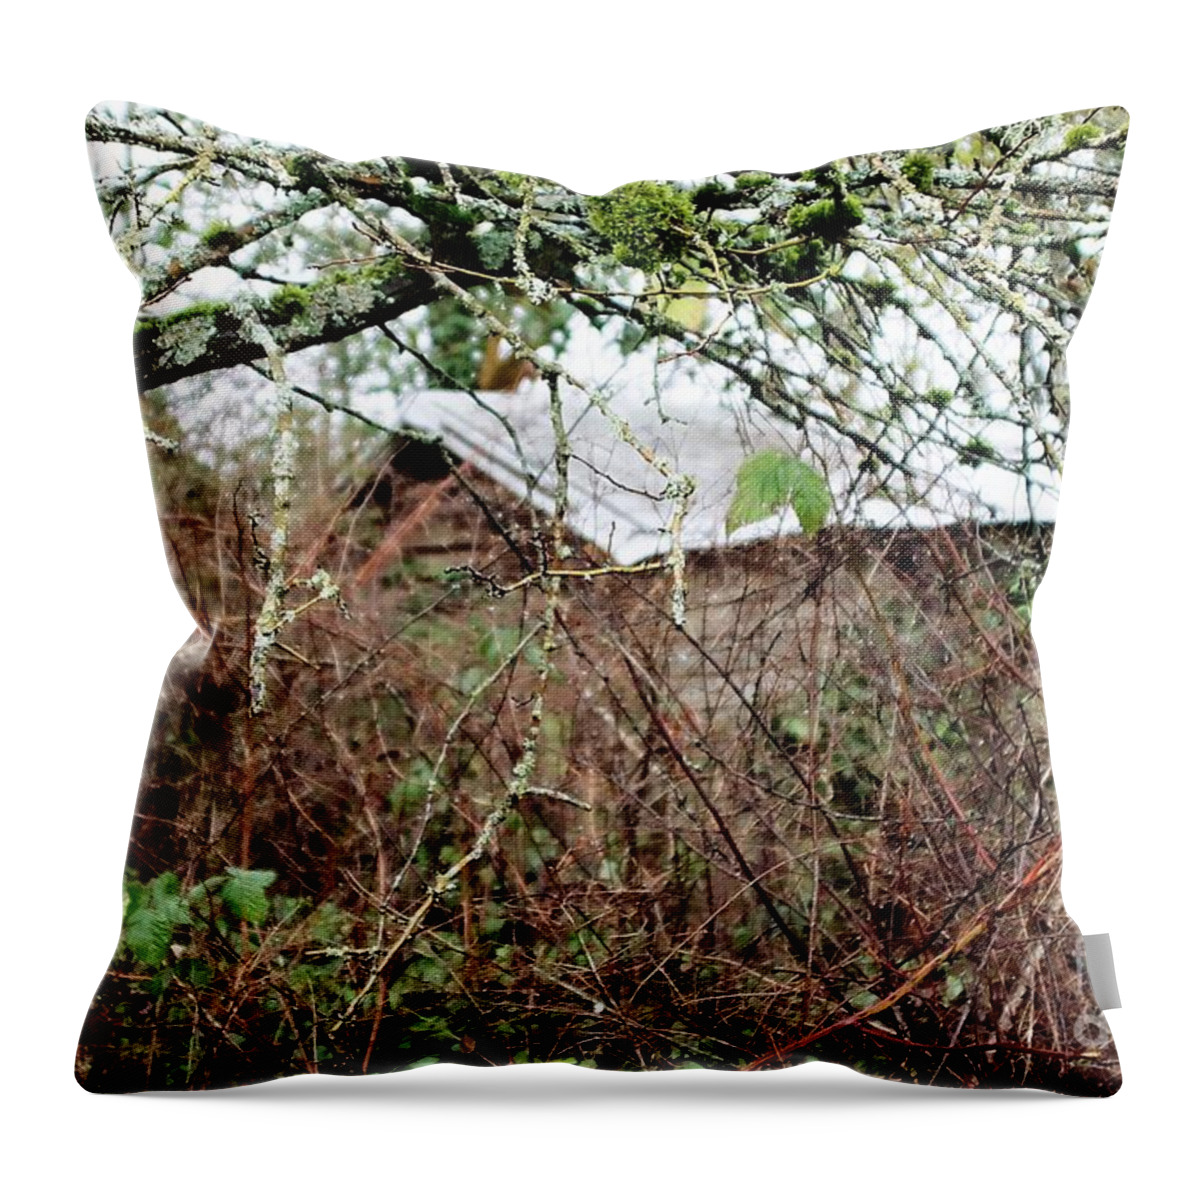 Shed Throw Pillow featuring the photograph The Old Shed by Kimberly Furey